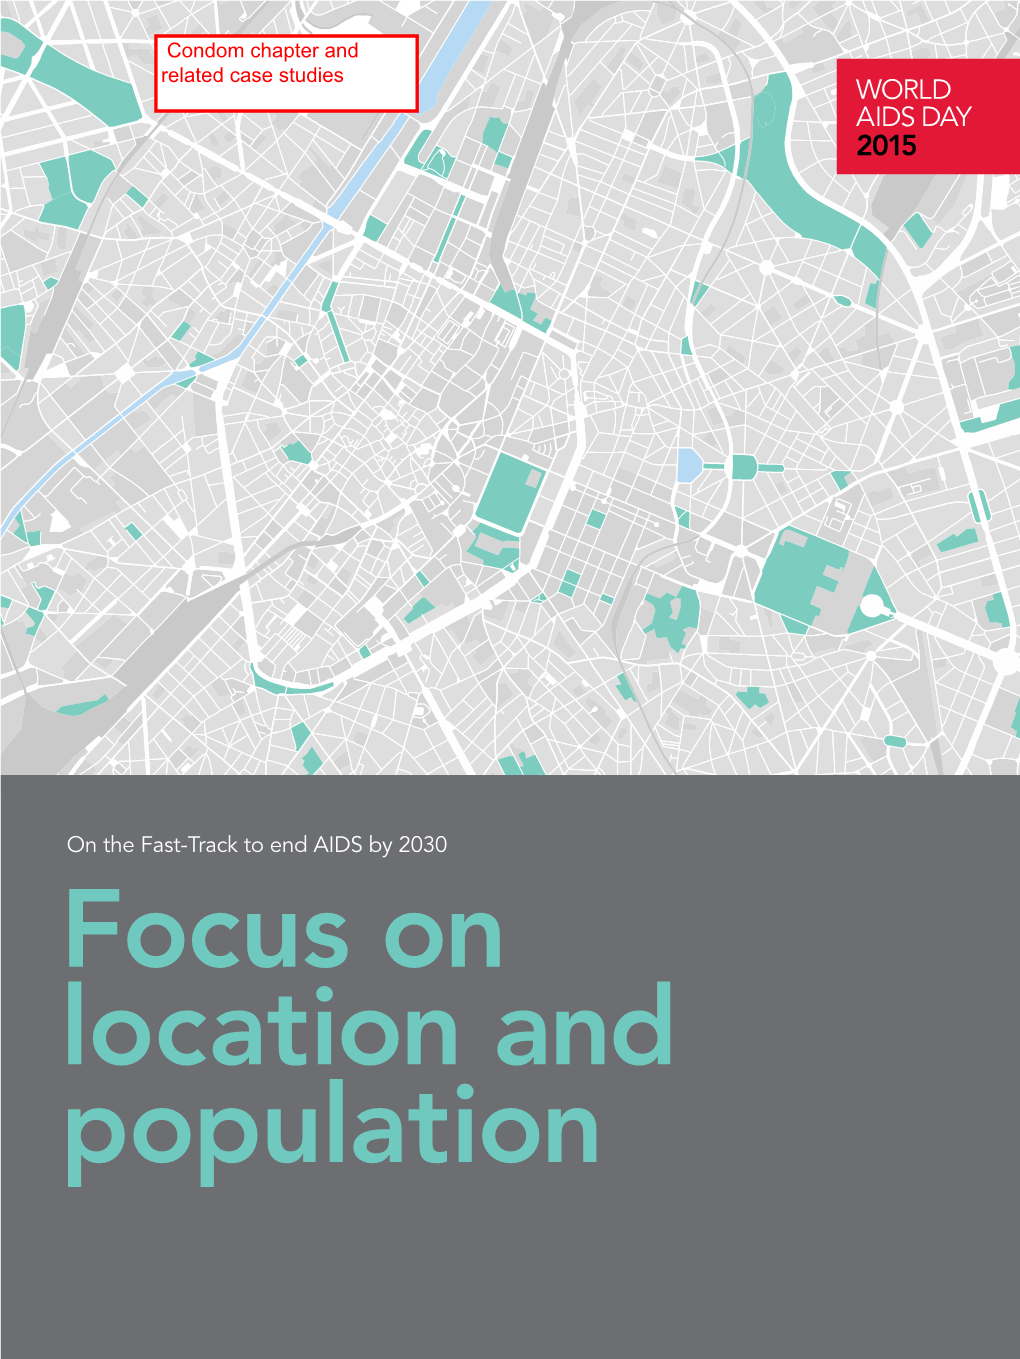 Focus on Location and Population